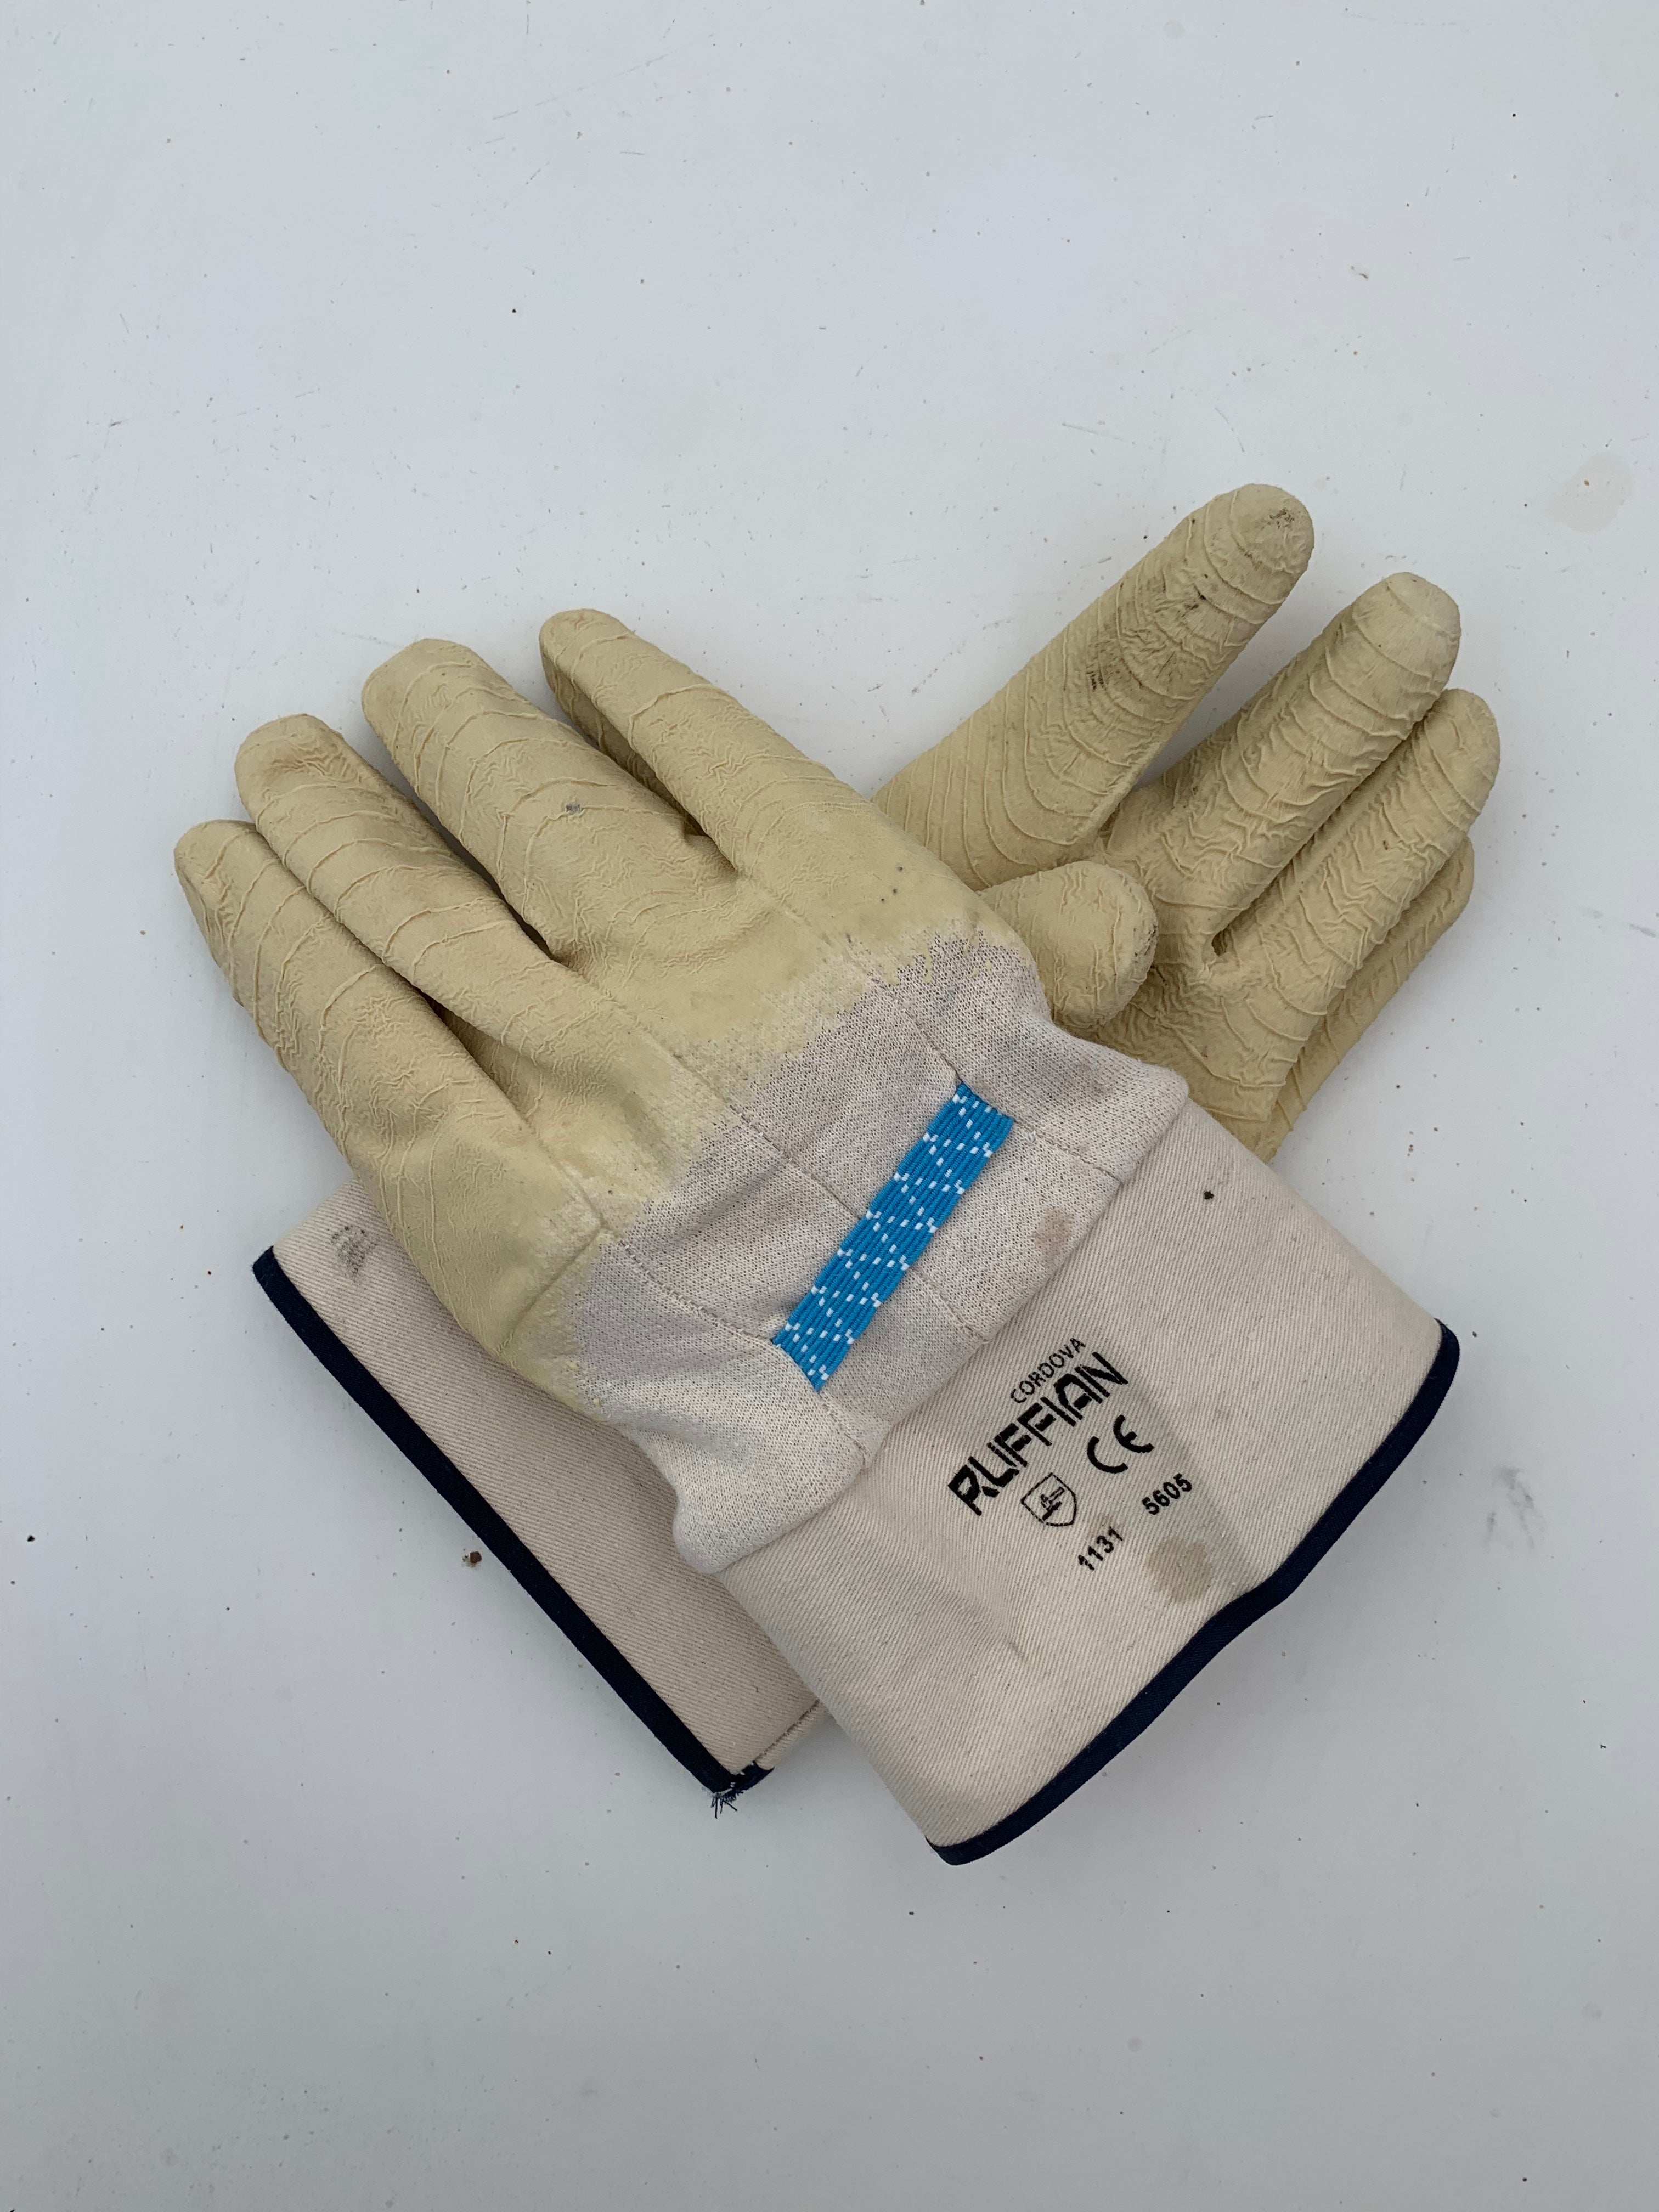 Wholesale oyster glove of Different Colors and Sizes –